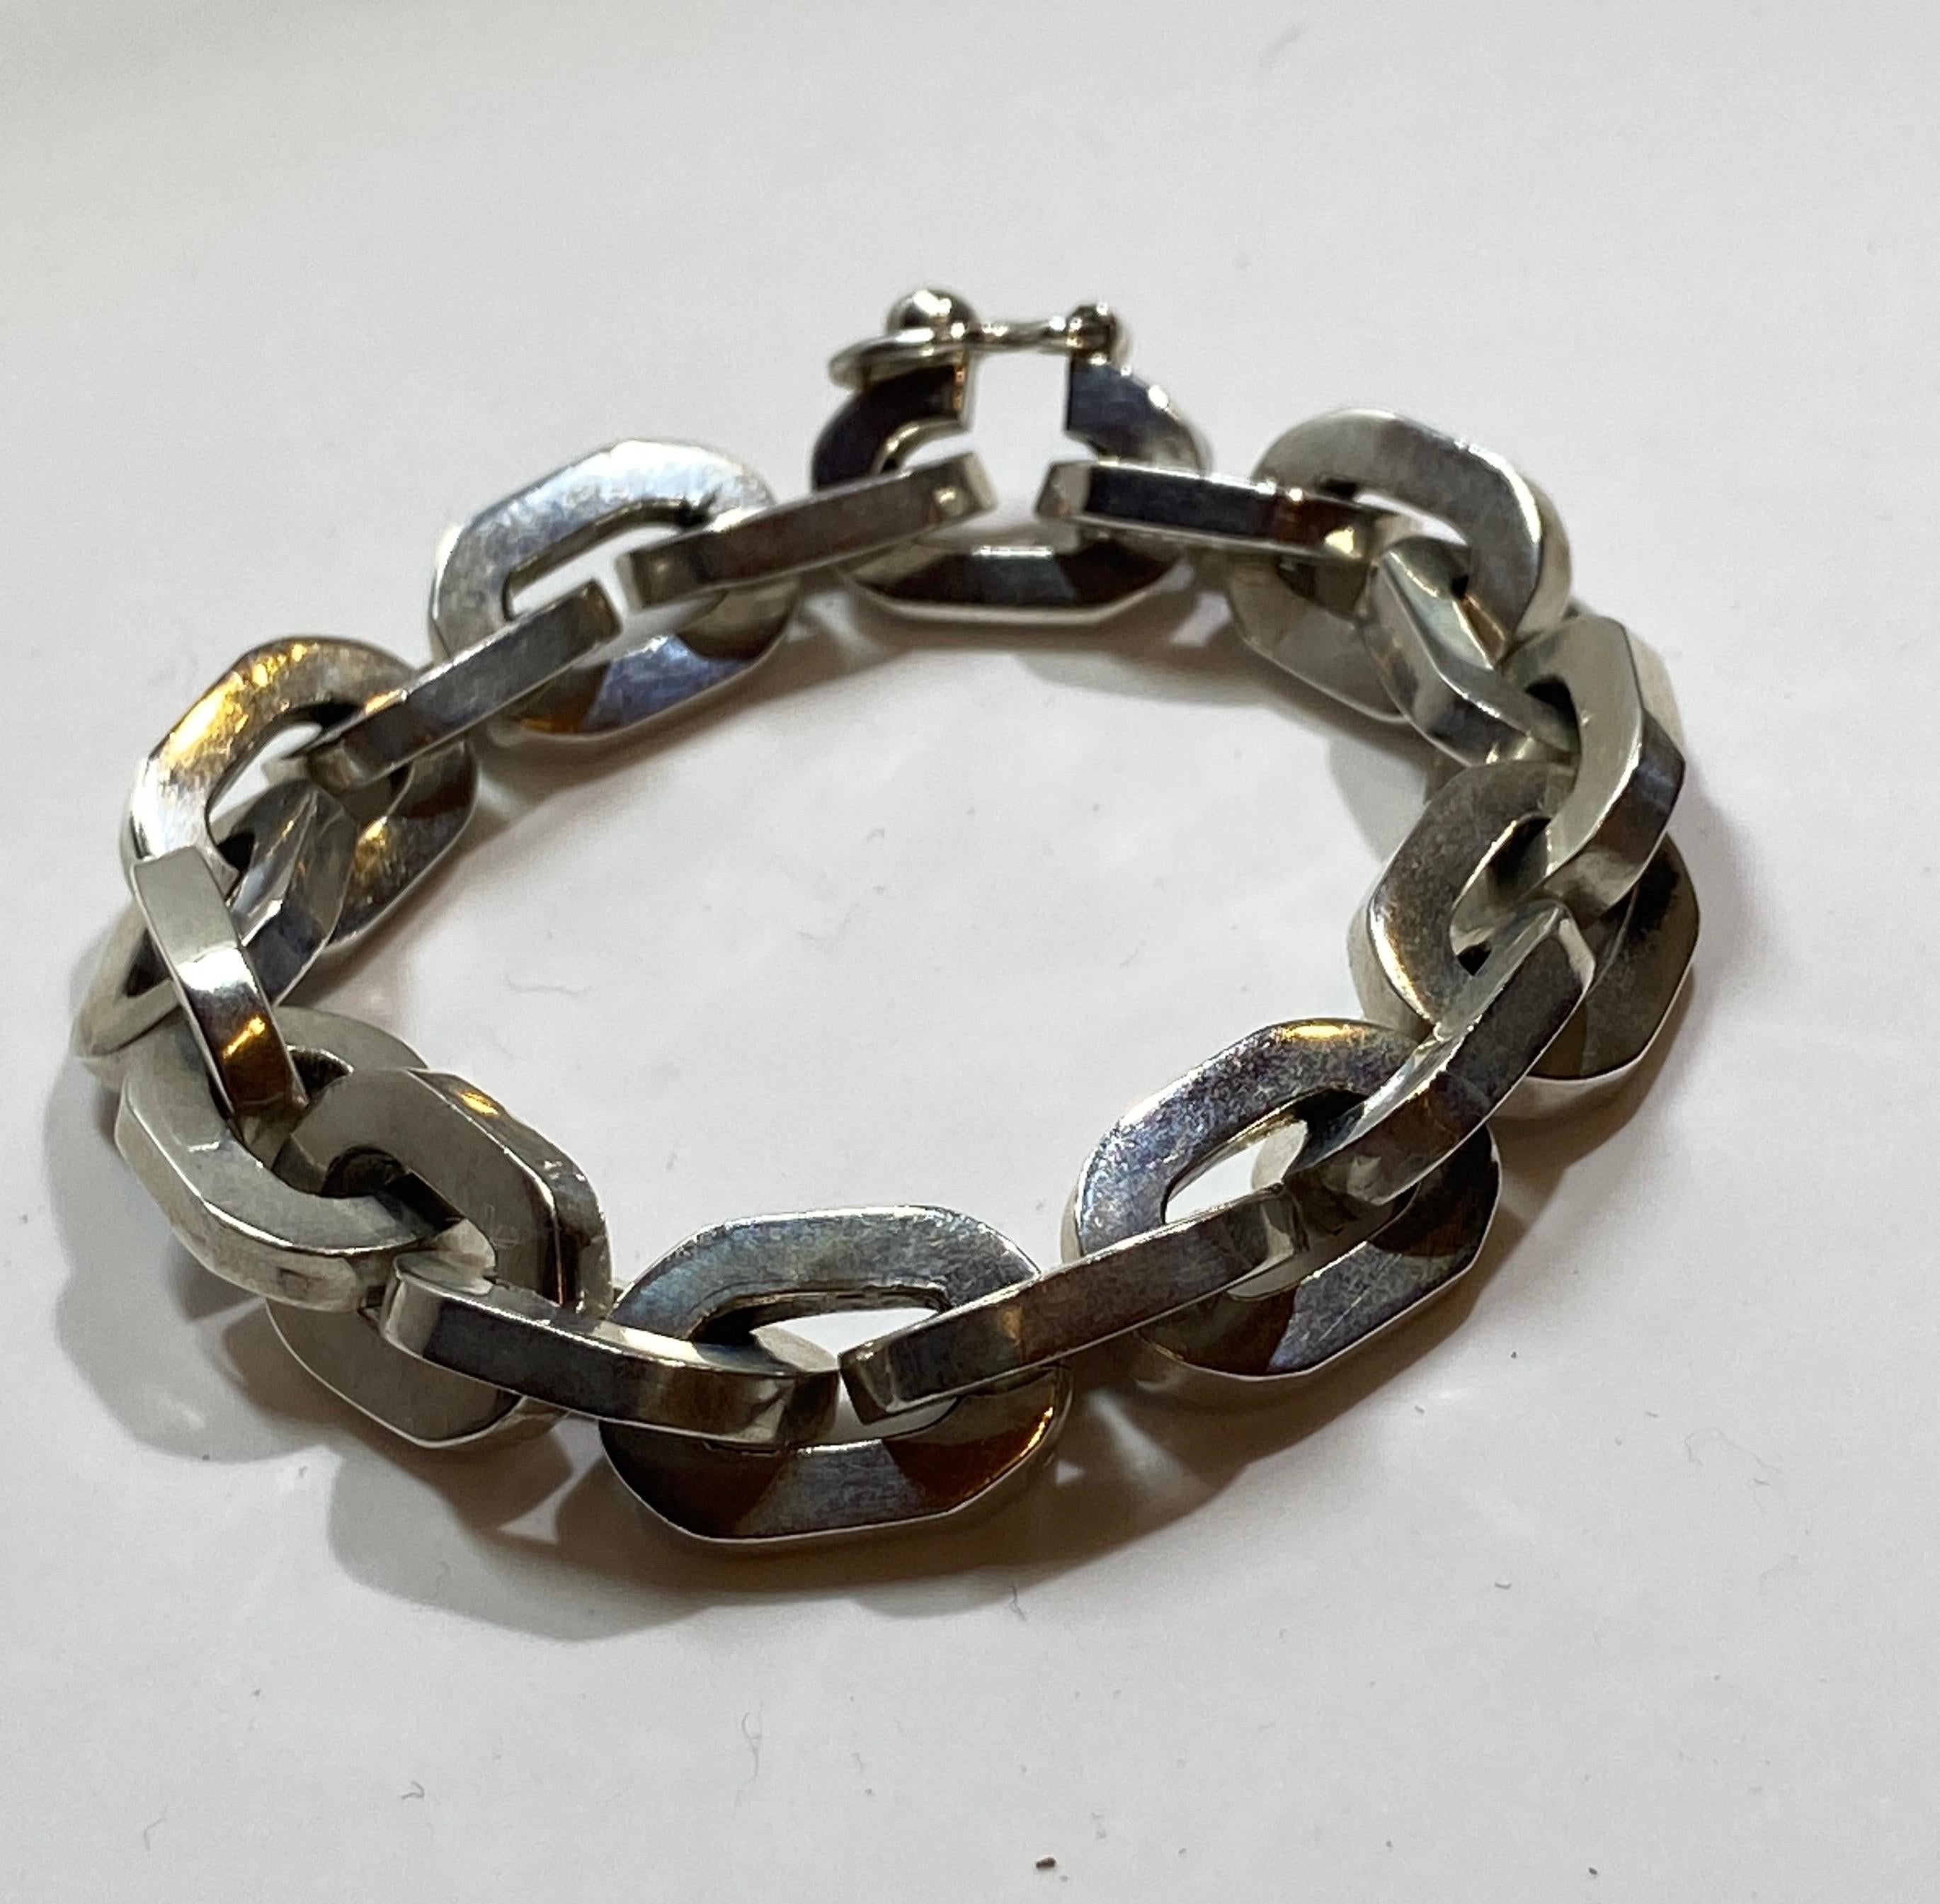 This thick heavy sterling silver chain-link bracelet measures 8 inches in length and 1/2 inch in width. Marked 925 and Made in Mexico.